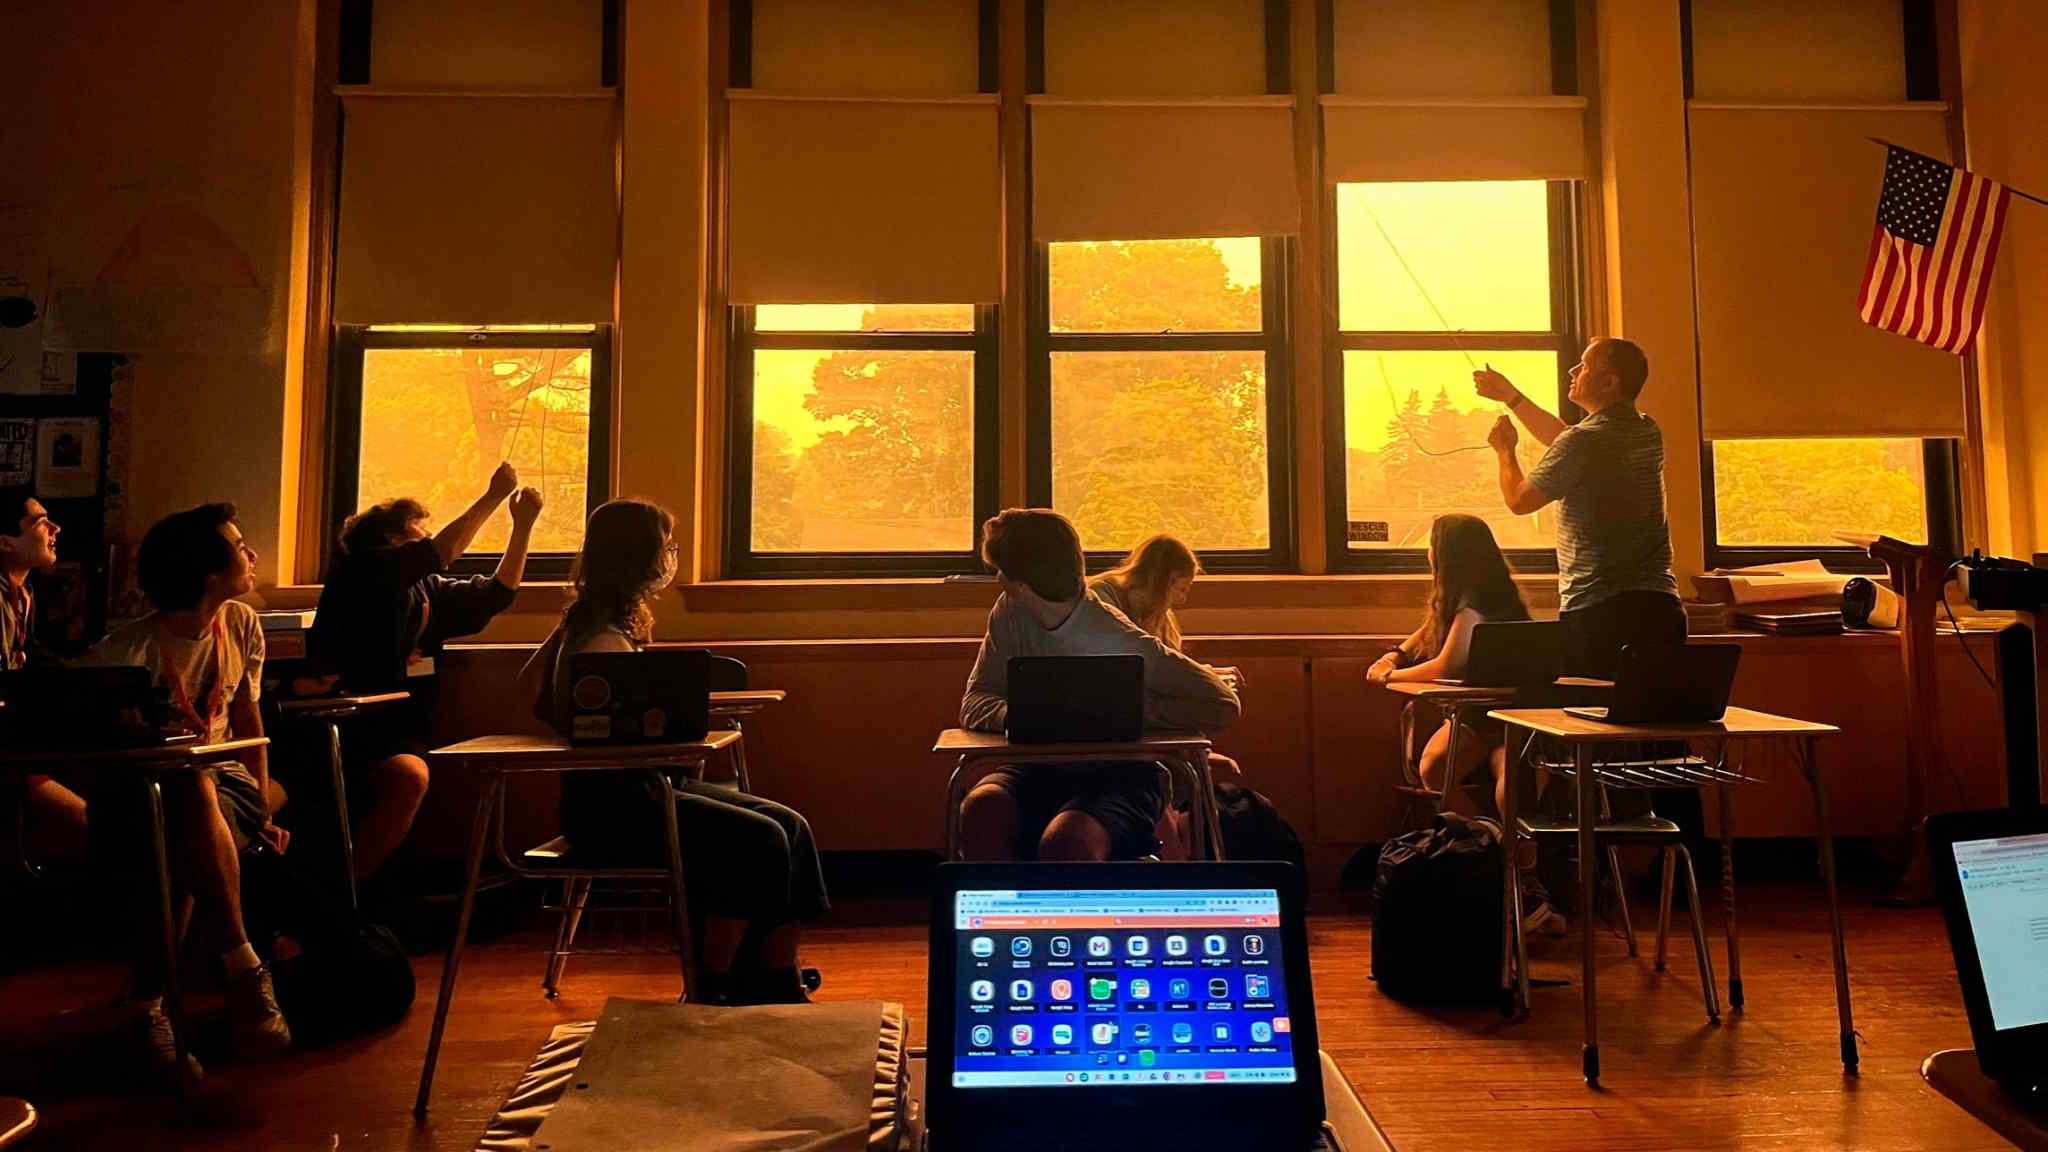 New York City haze triggers remote learning for largest US school district